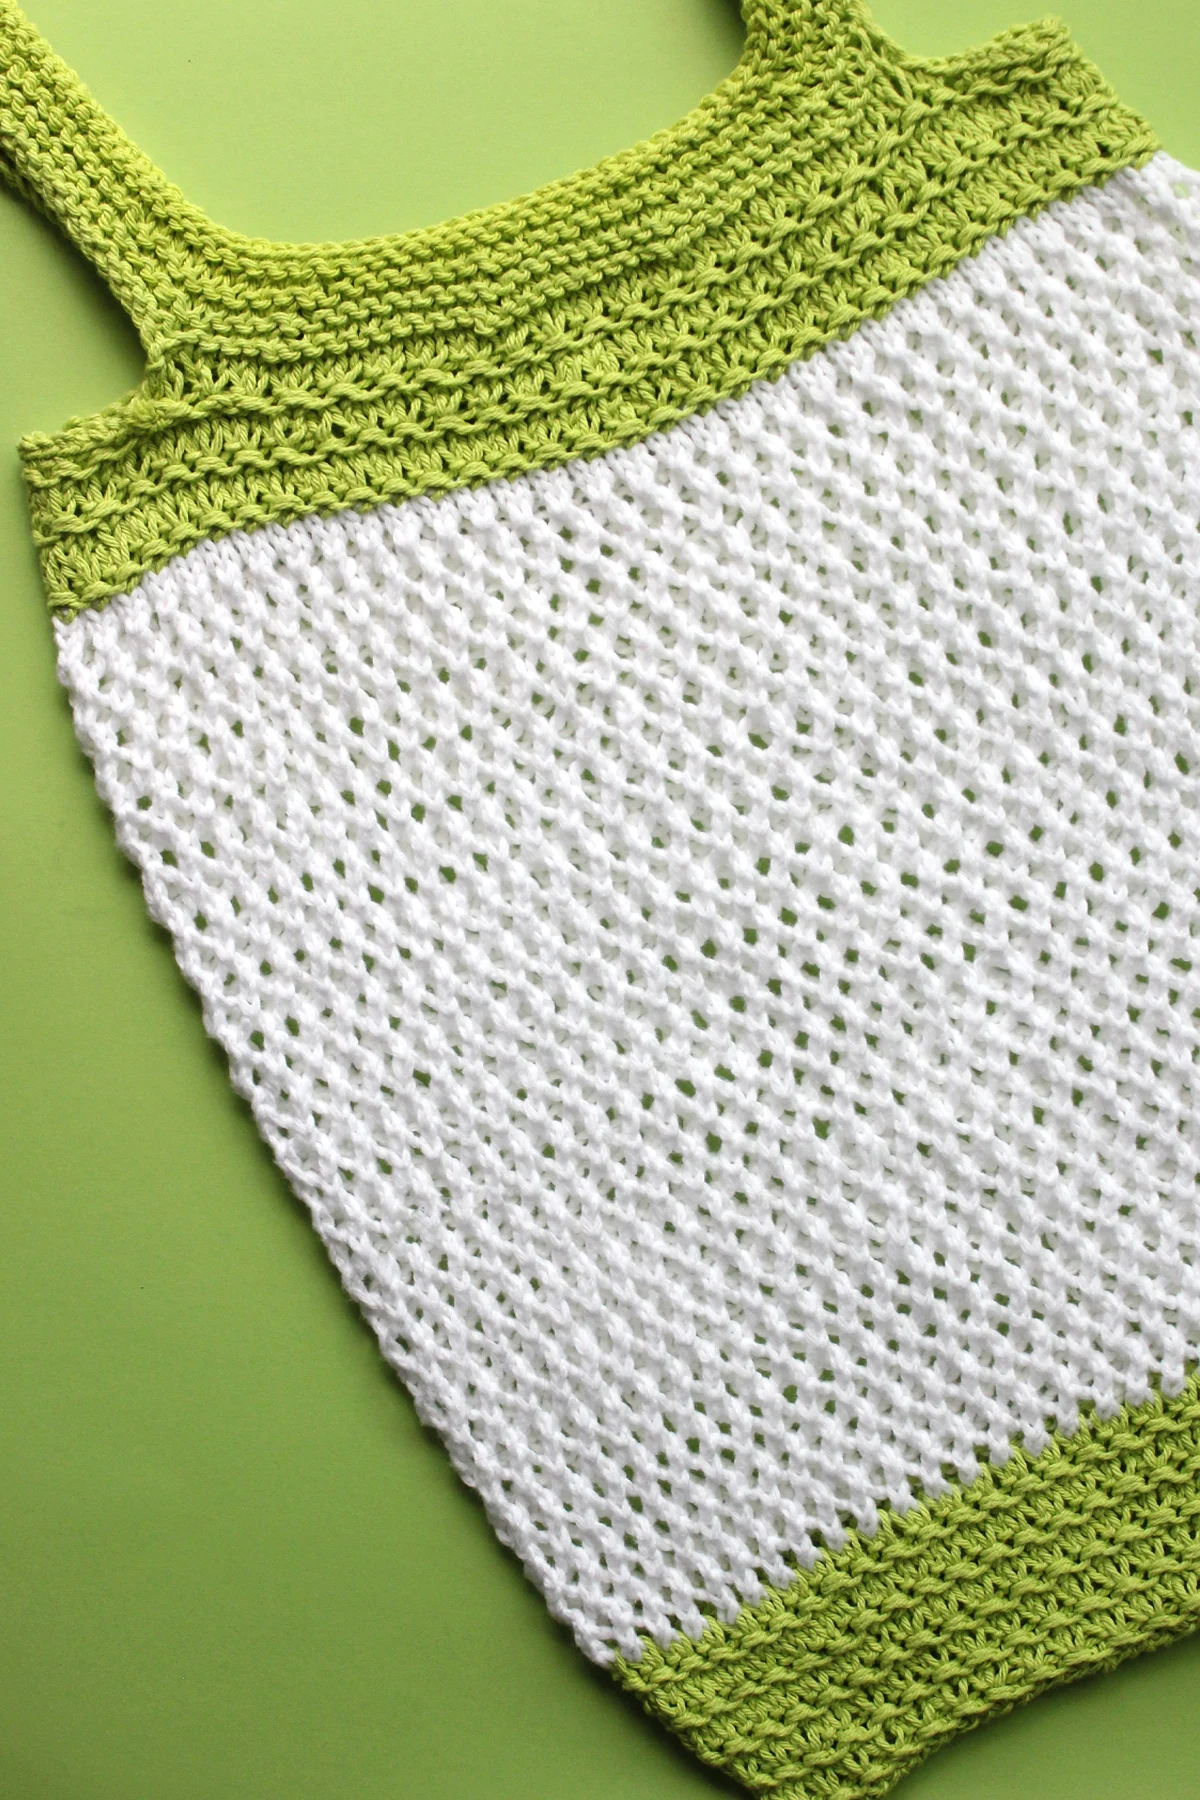 Mesh market bag knitted in green and white yarn colors.